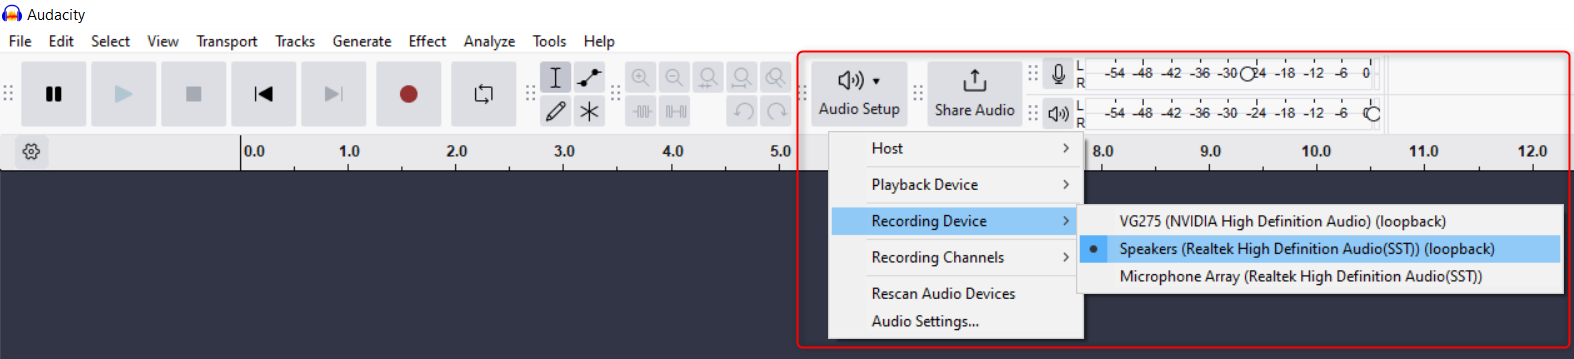 Selecting a loopback device for recording desktop audio in Audacity.